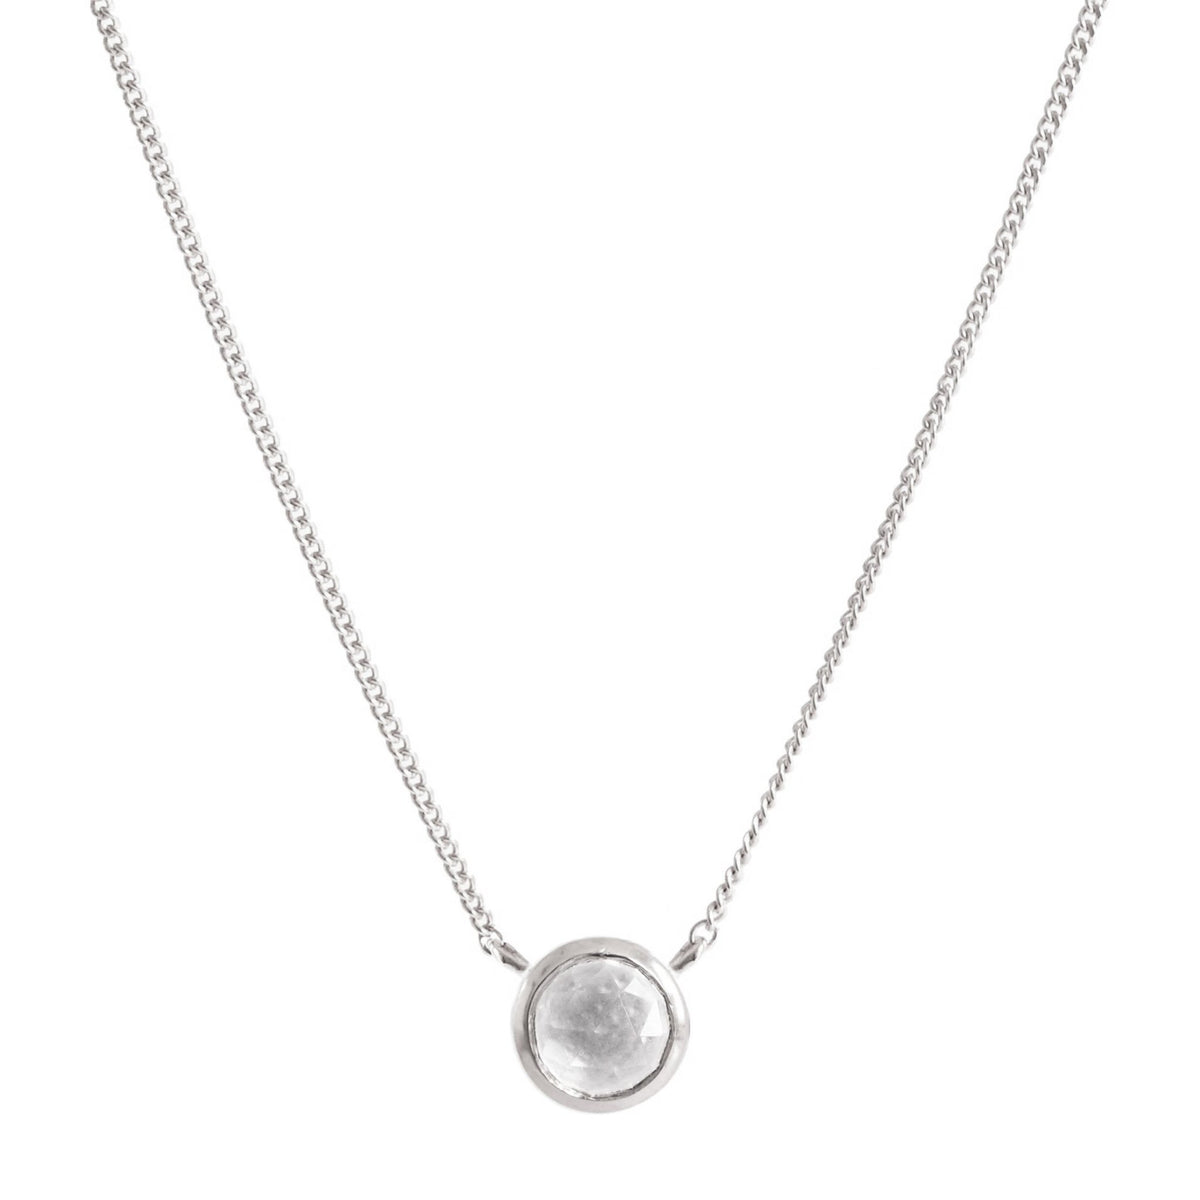 DAINTY LEGACY NECKLACE - WHITE TOPAZ &amp; SILVER - SO PRETTY CARA COTTER